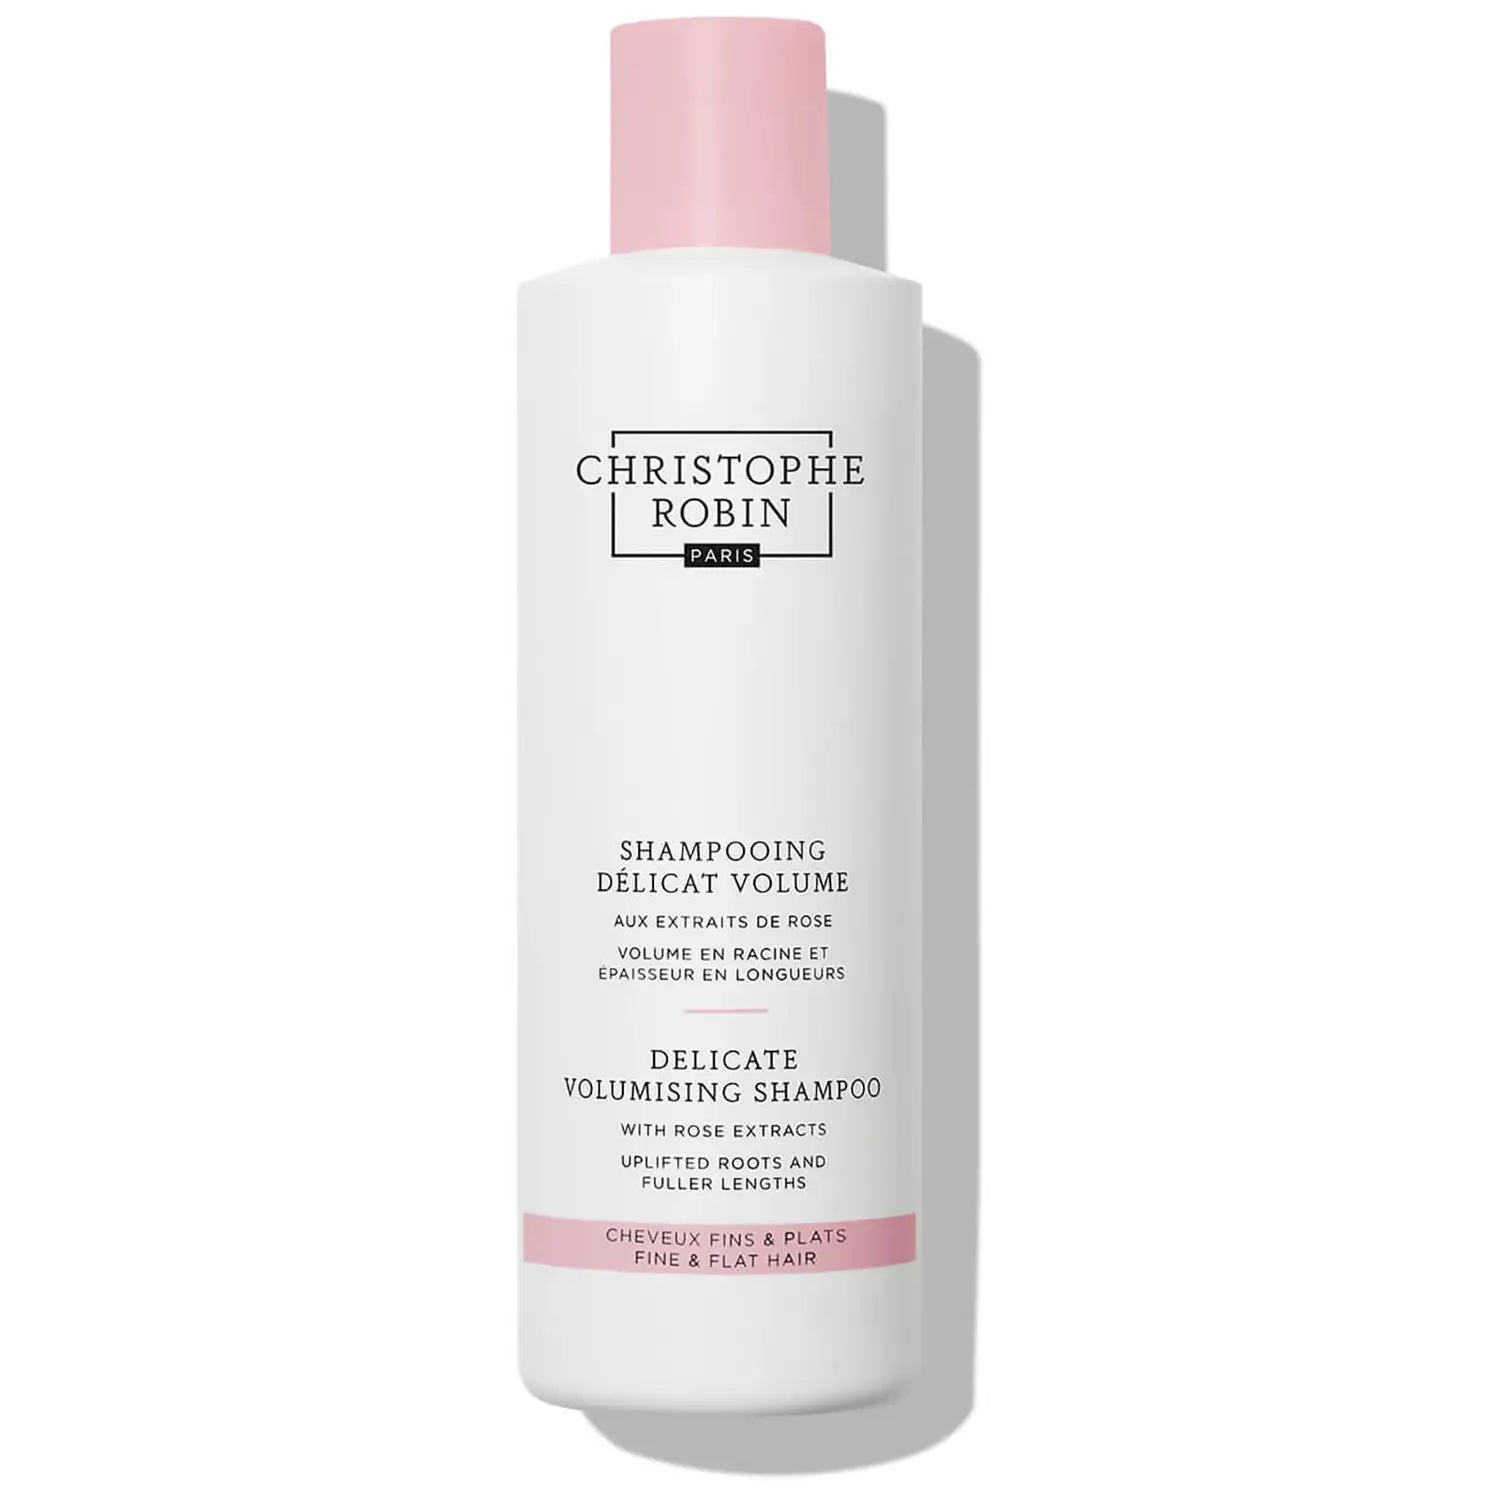 CHRISTOPHE ROBIN Delicate volumizing shampoo with rose extracts 250ml